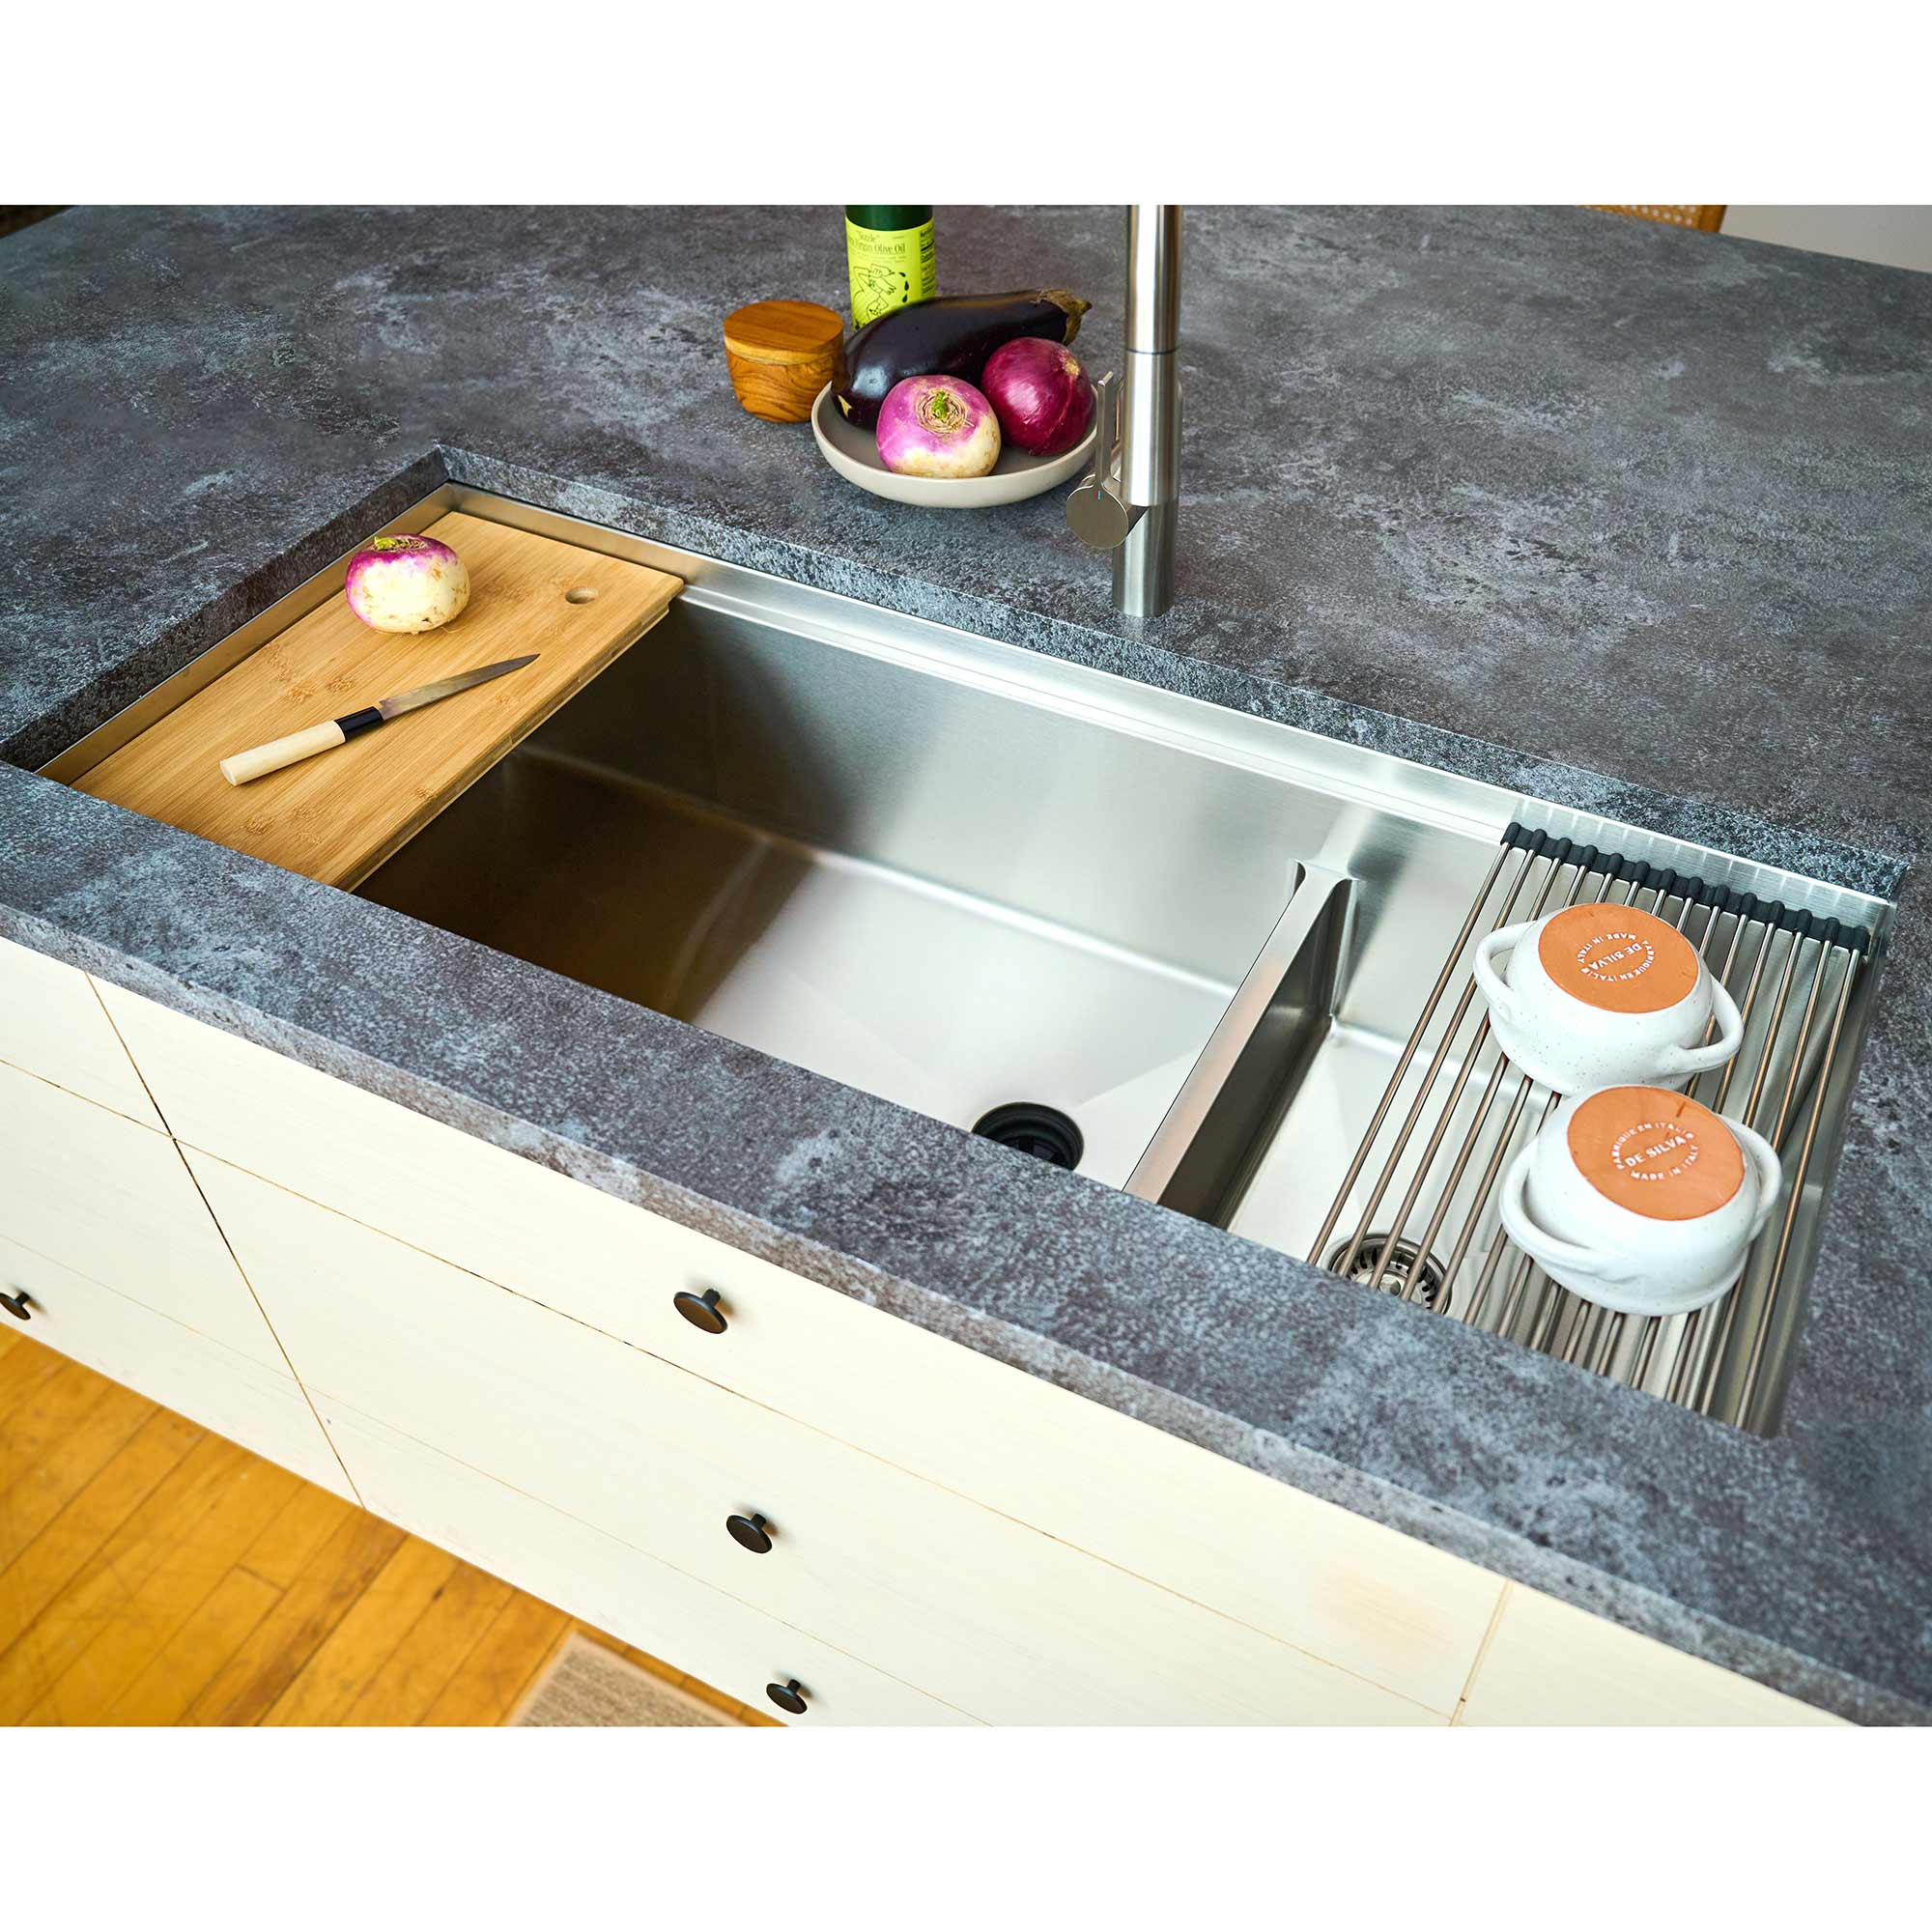 46 inch double bowl workstation sink with smart low divide, half inch radius corners, and workstation sink accessories